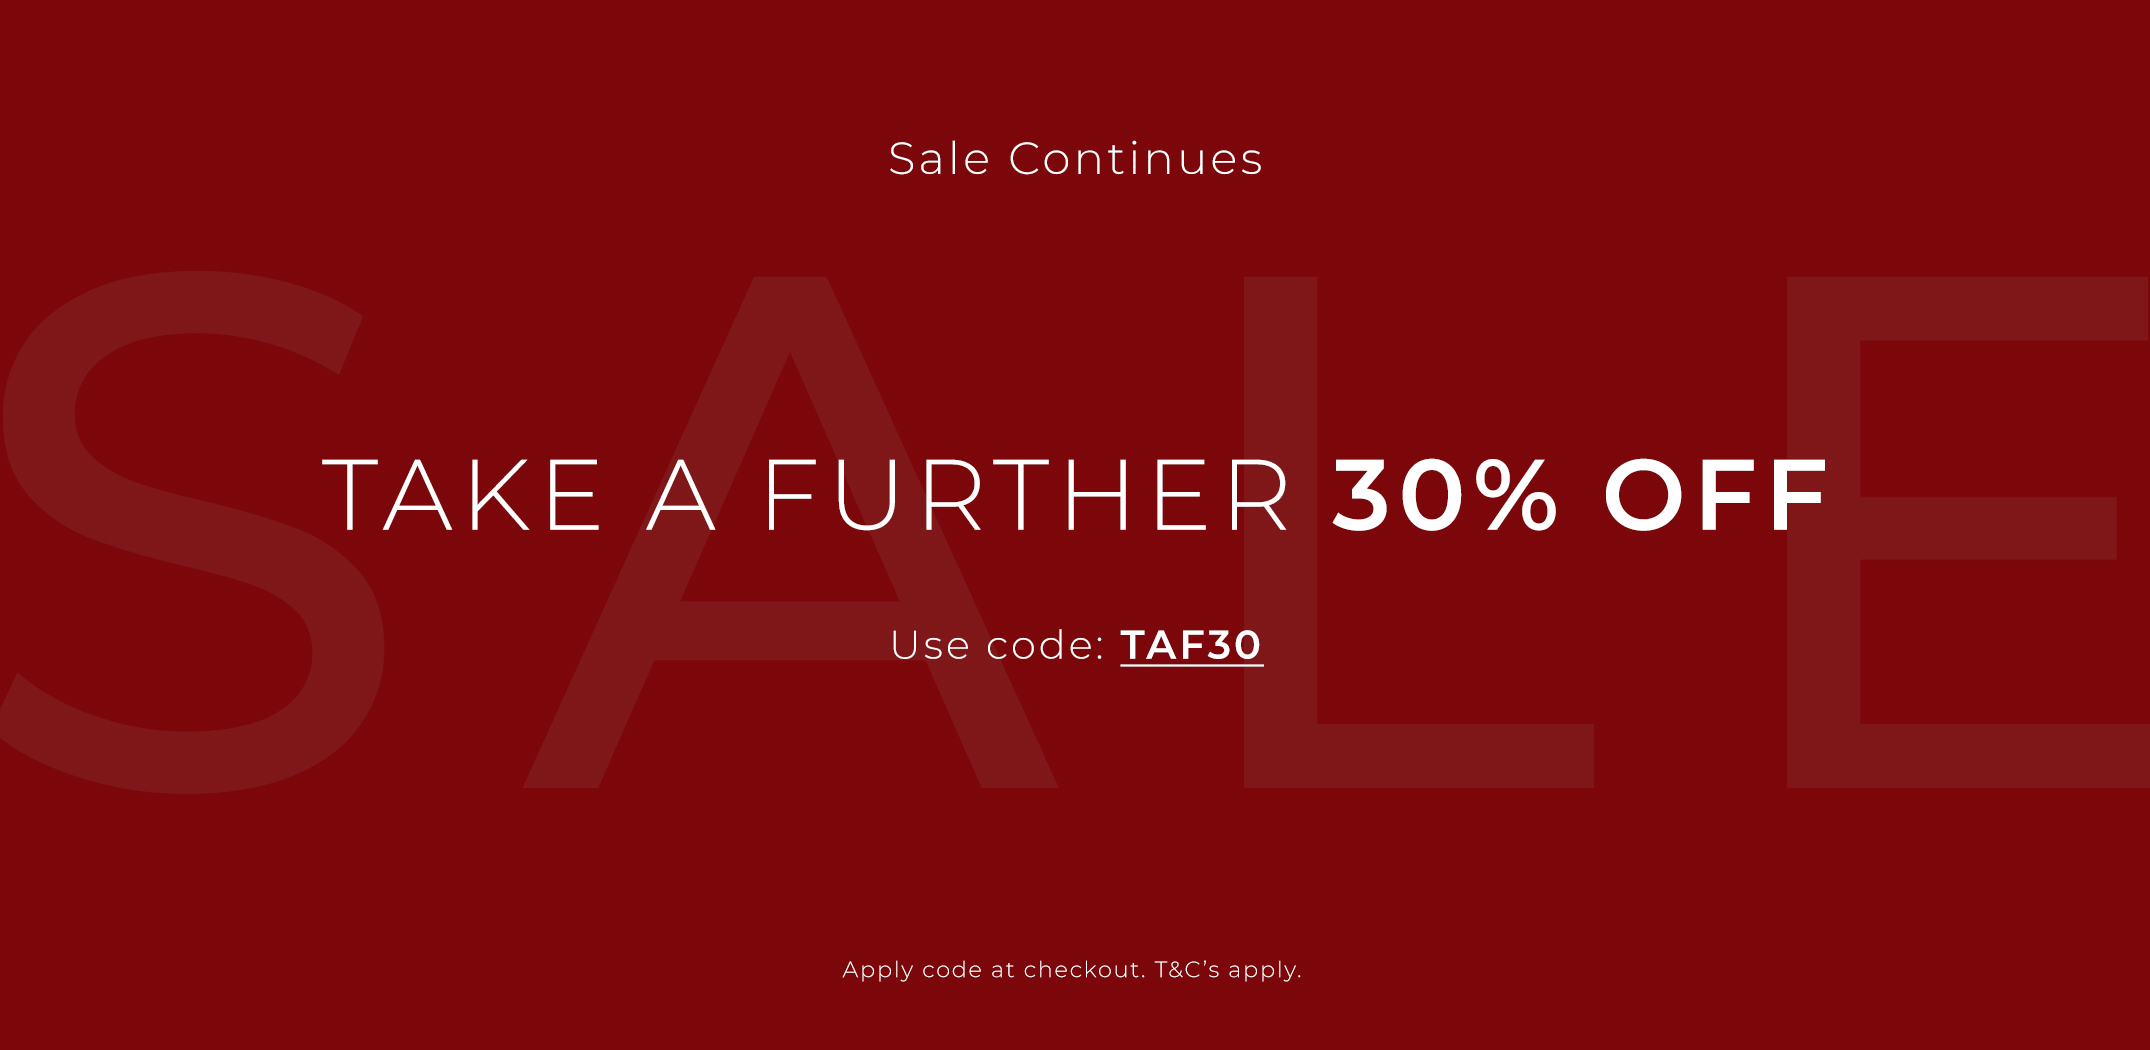 Take a further extra 30% OFF on sale styles